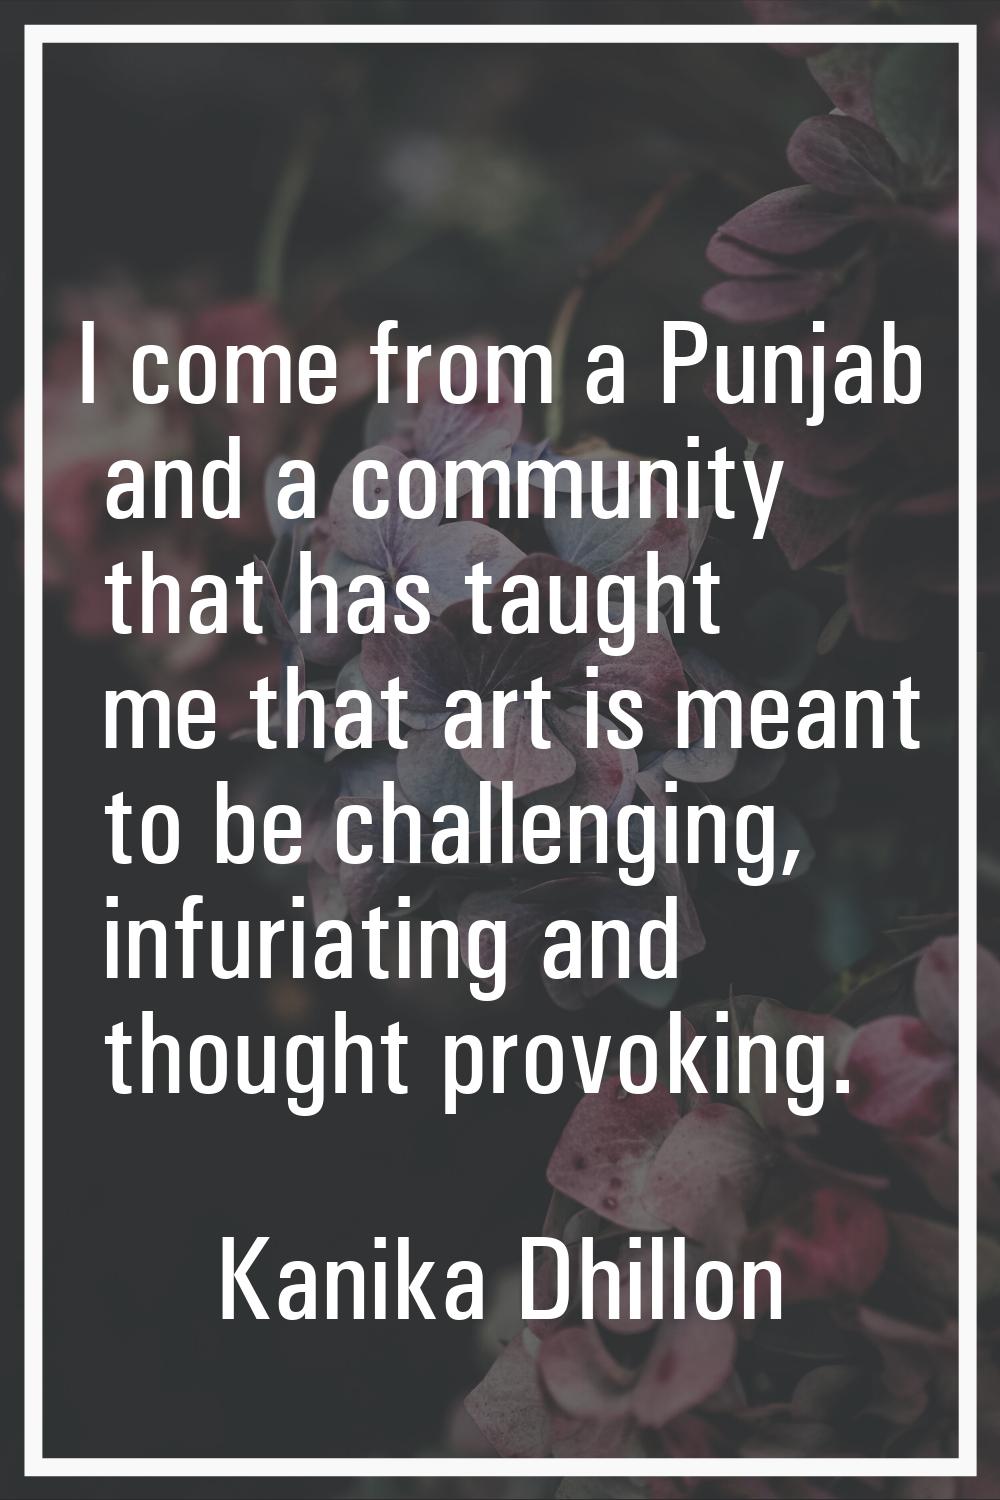 I come from a Punjab and a community that has taught me that art is meant to be challenging, infuri